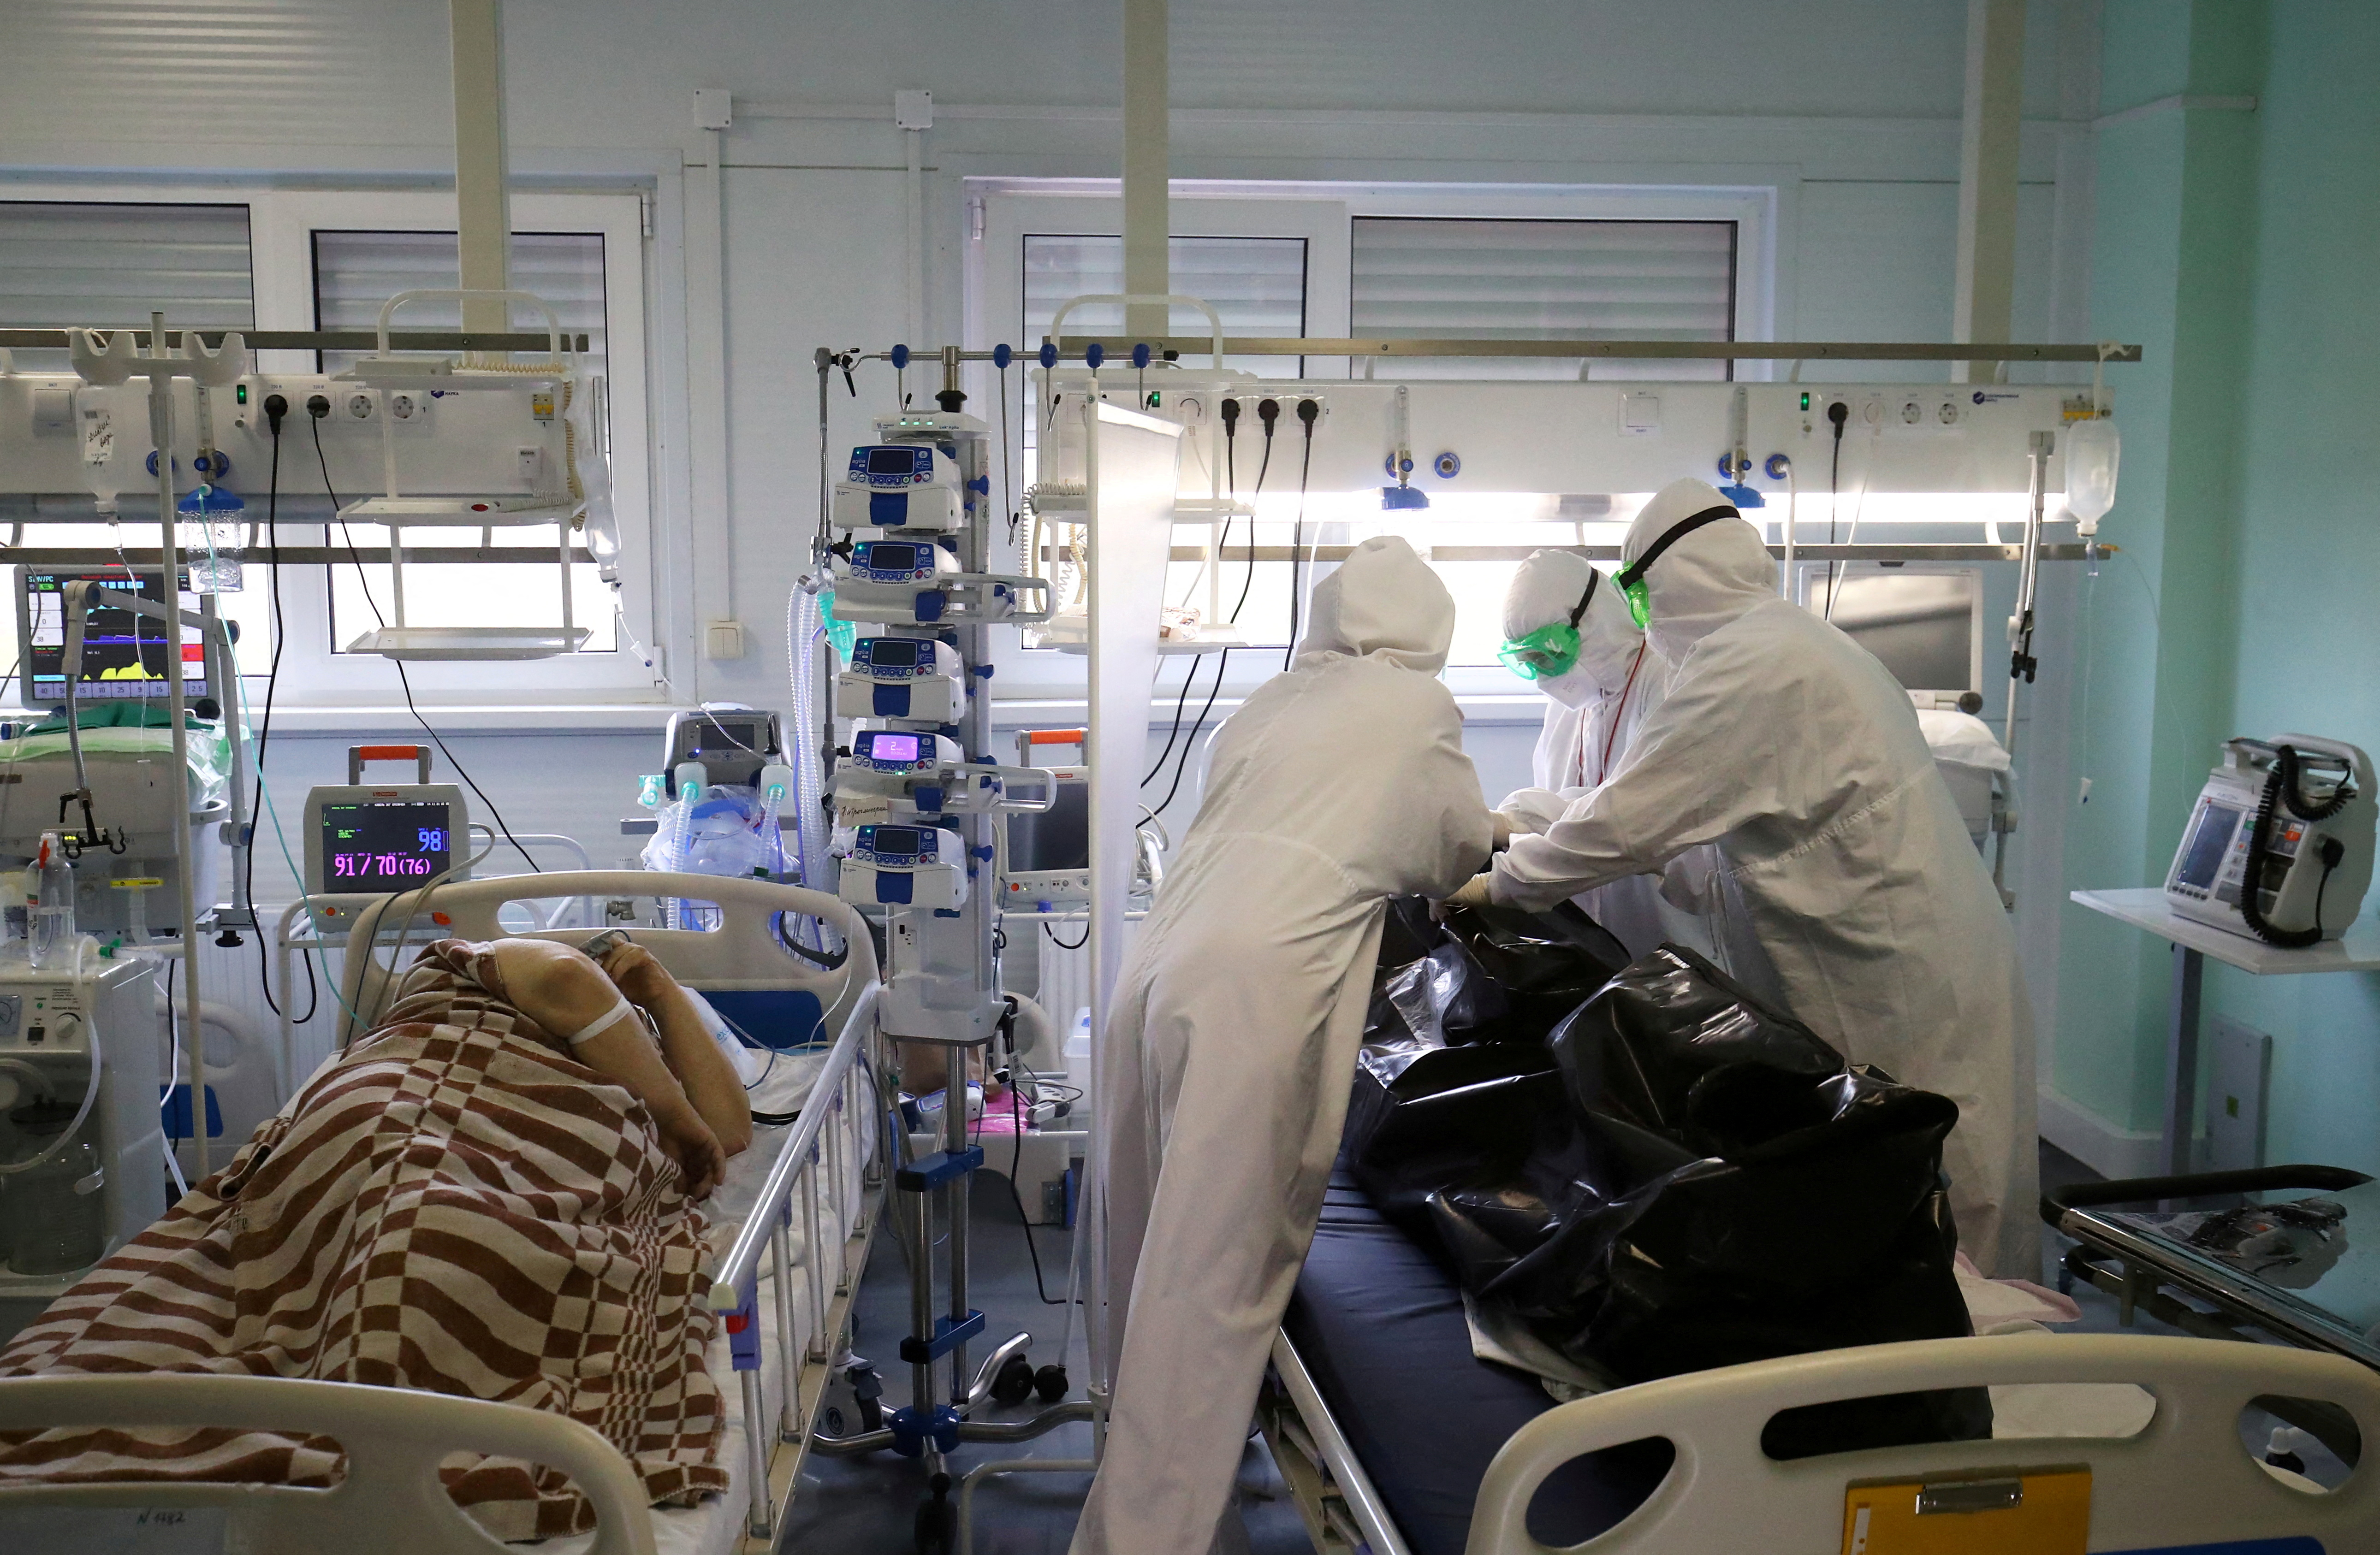 Medical specialists place the body of a person who died at the ICU unit for coronavirus disease (COVID-19) patients in a bag at a local hospital in the town of Kalach-on-Don in Volgograd Region, Russia November 14, 2021. REUTERS/Kirill Braga